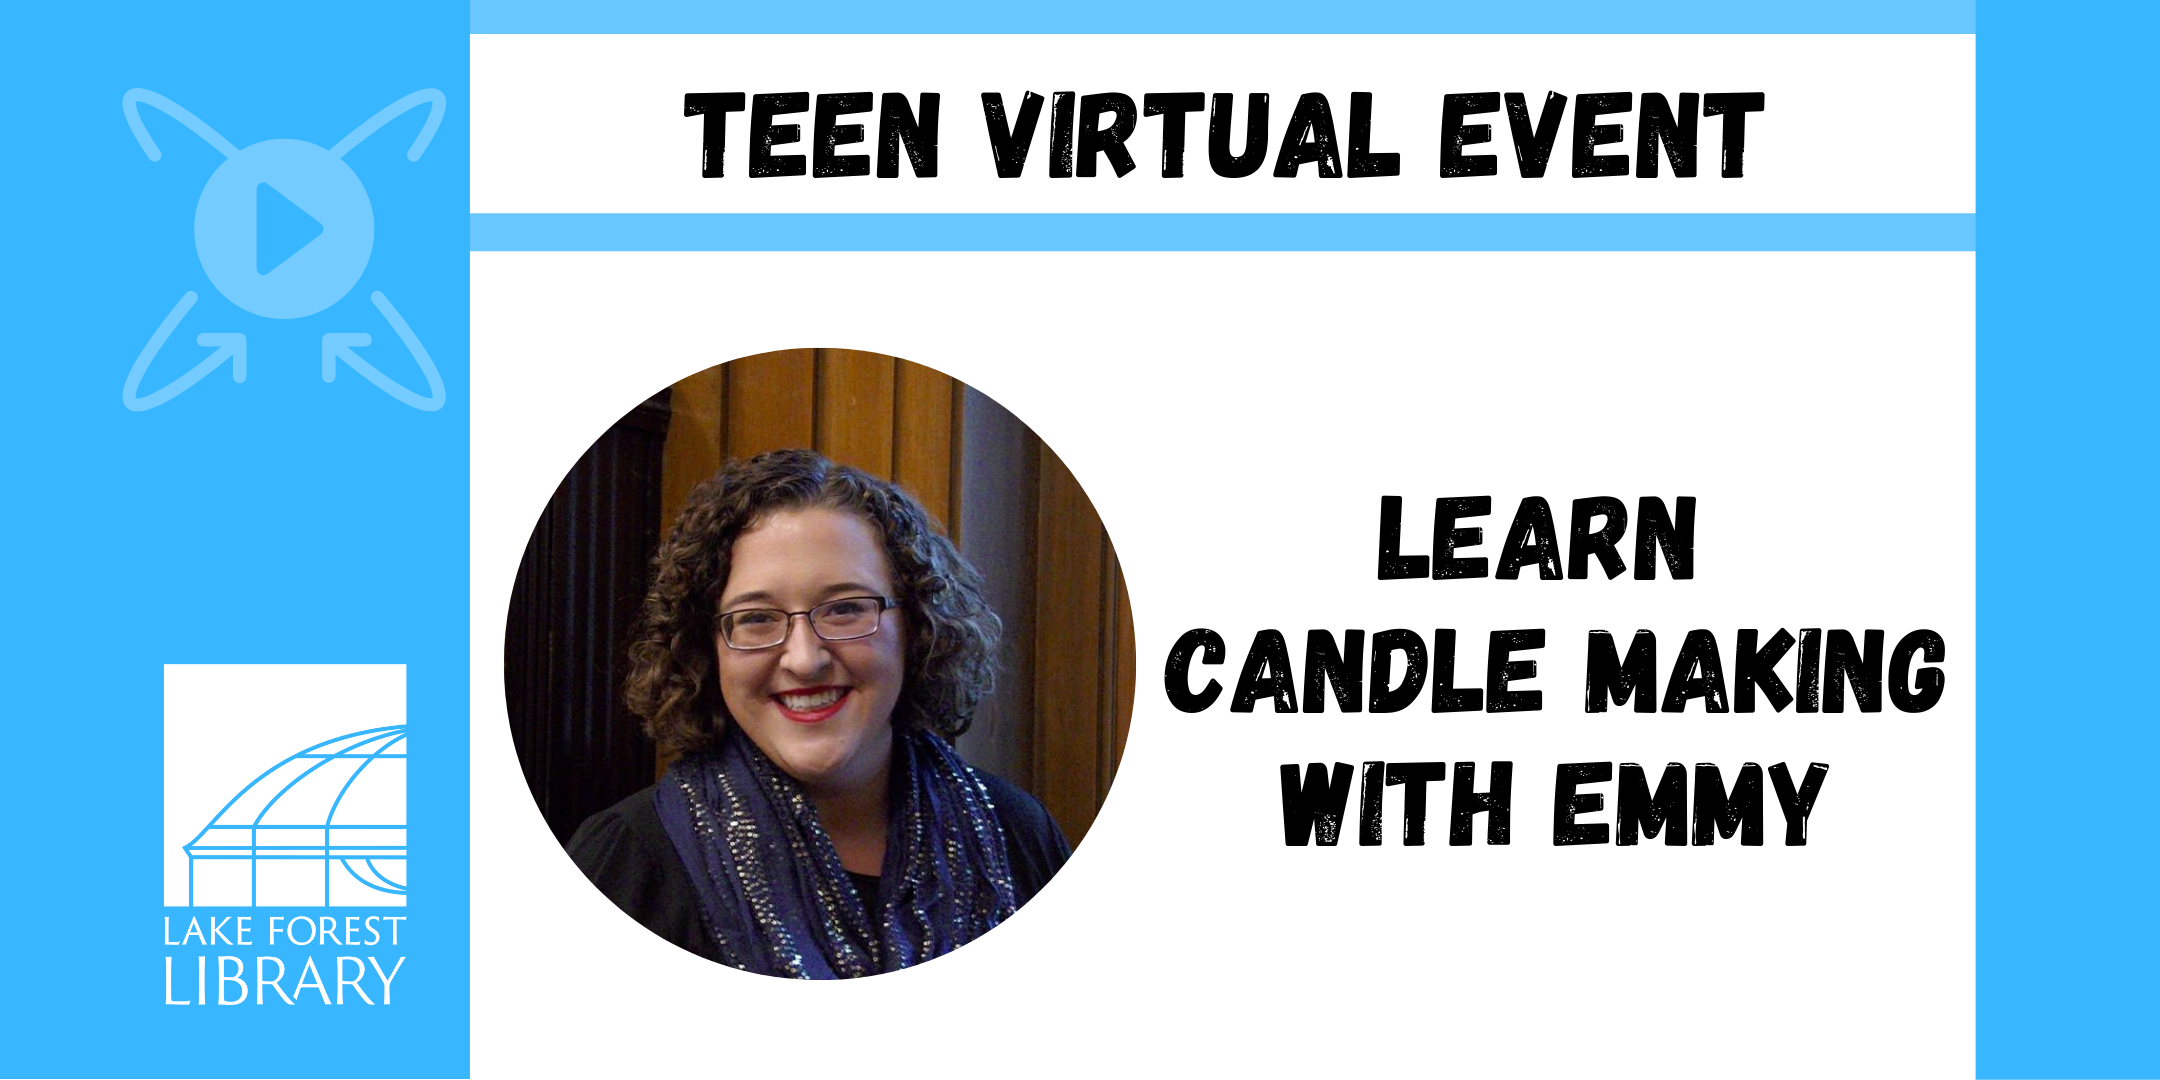 Learn Candle Making with Emmy